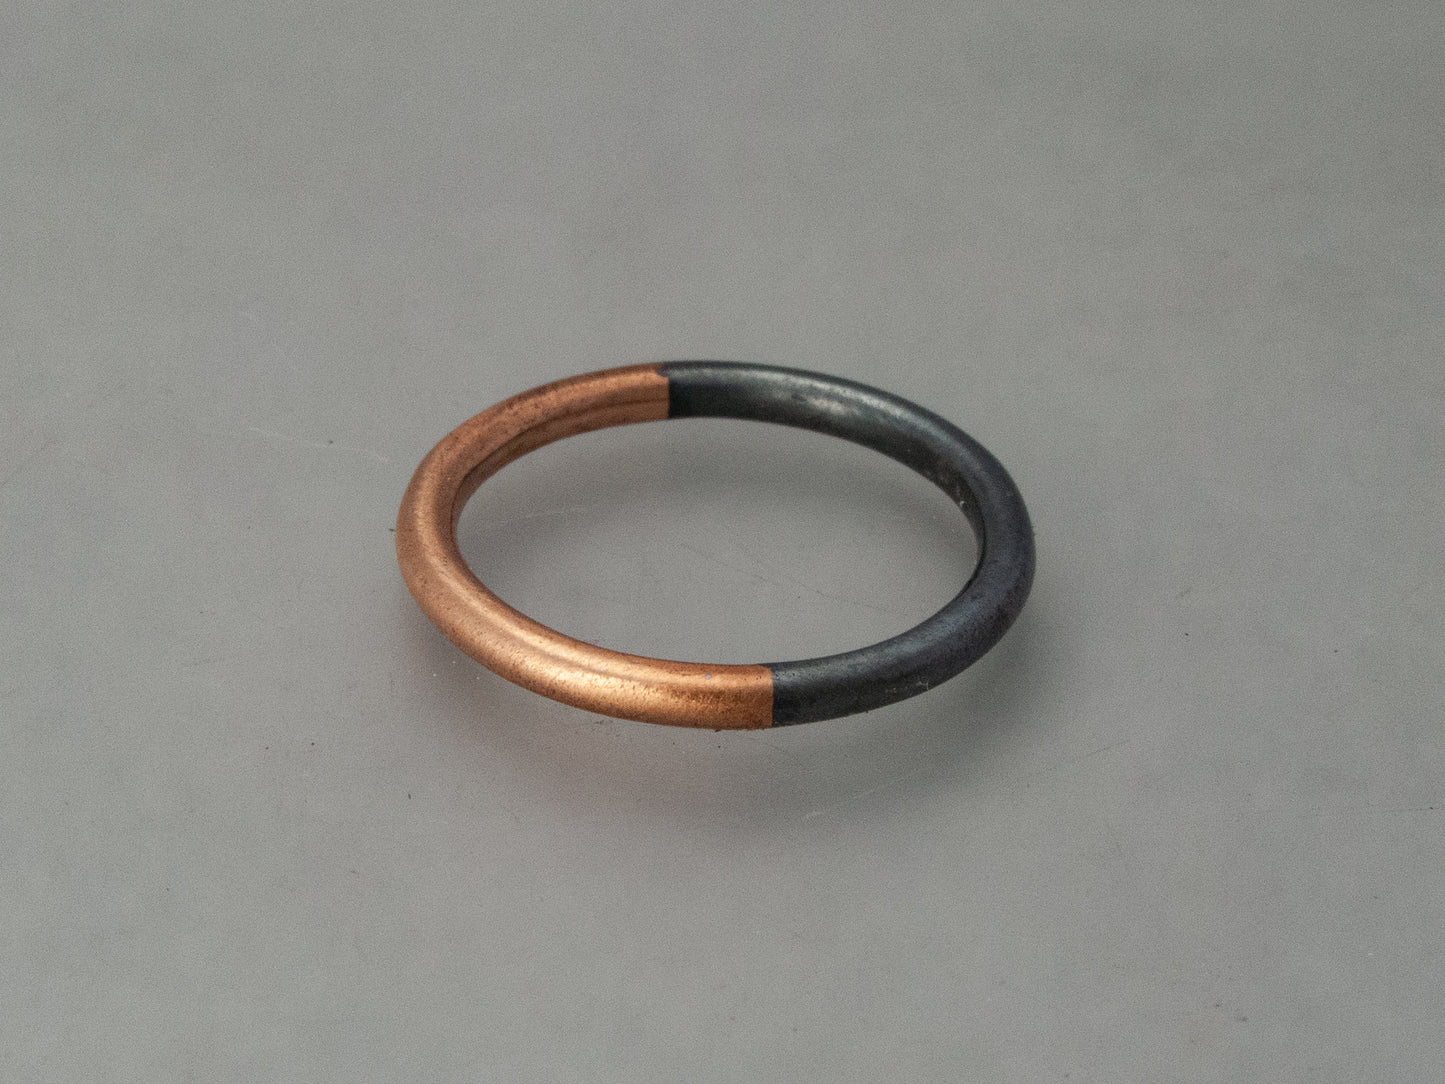 Mixed Metals Round Women's Wedding Ring | 50/50 Partnership Band in Silver and Gold